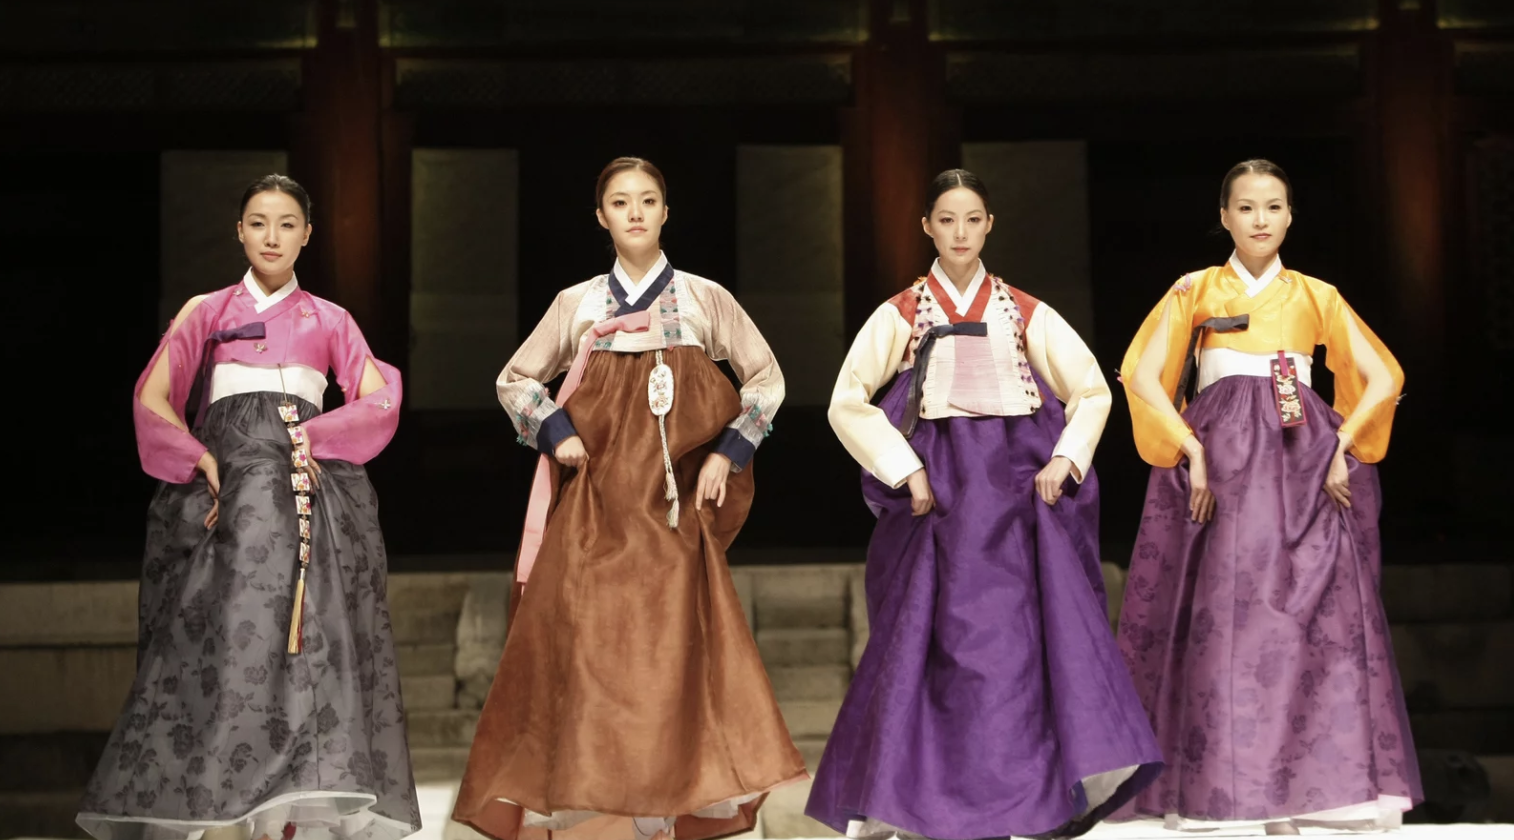 Four women wearing hanbok in different colors are shown with their hands on their hips posing in front of a dark background